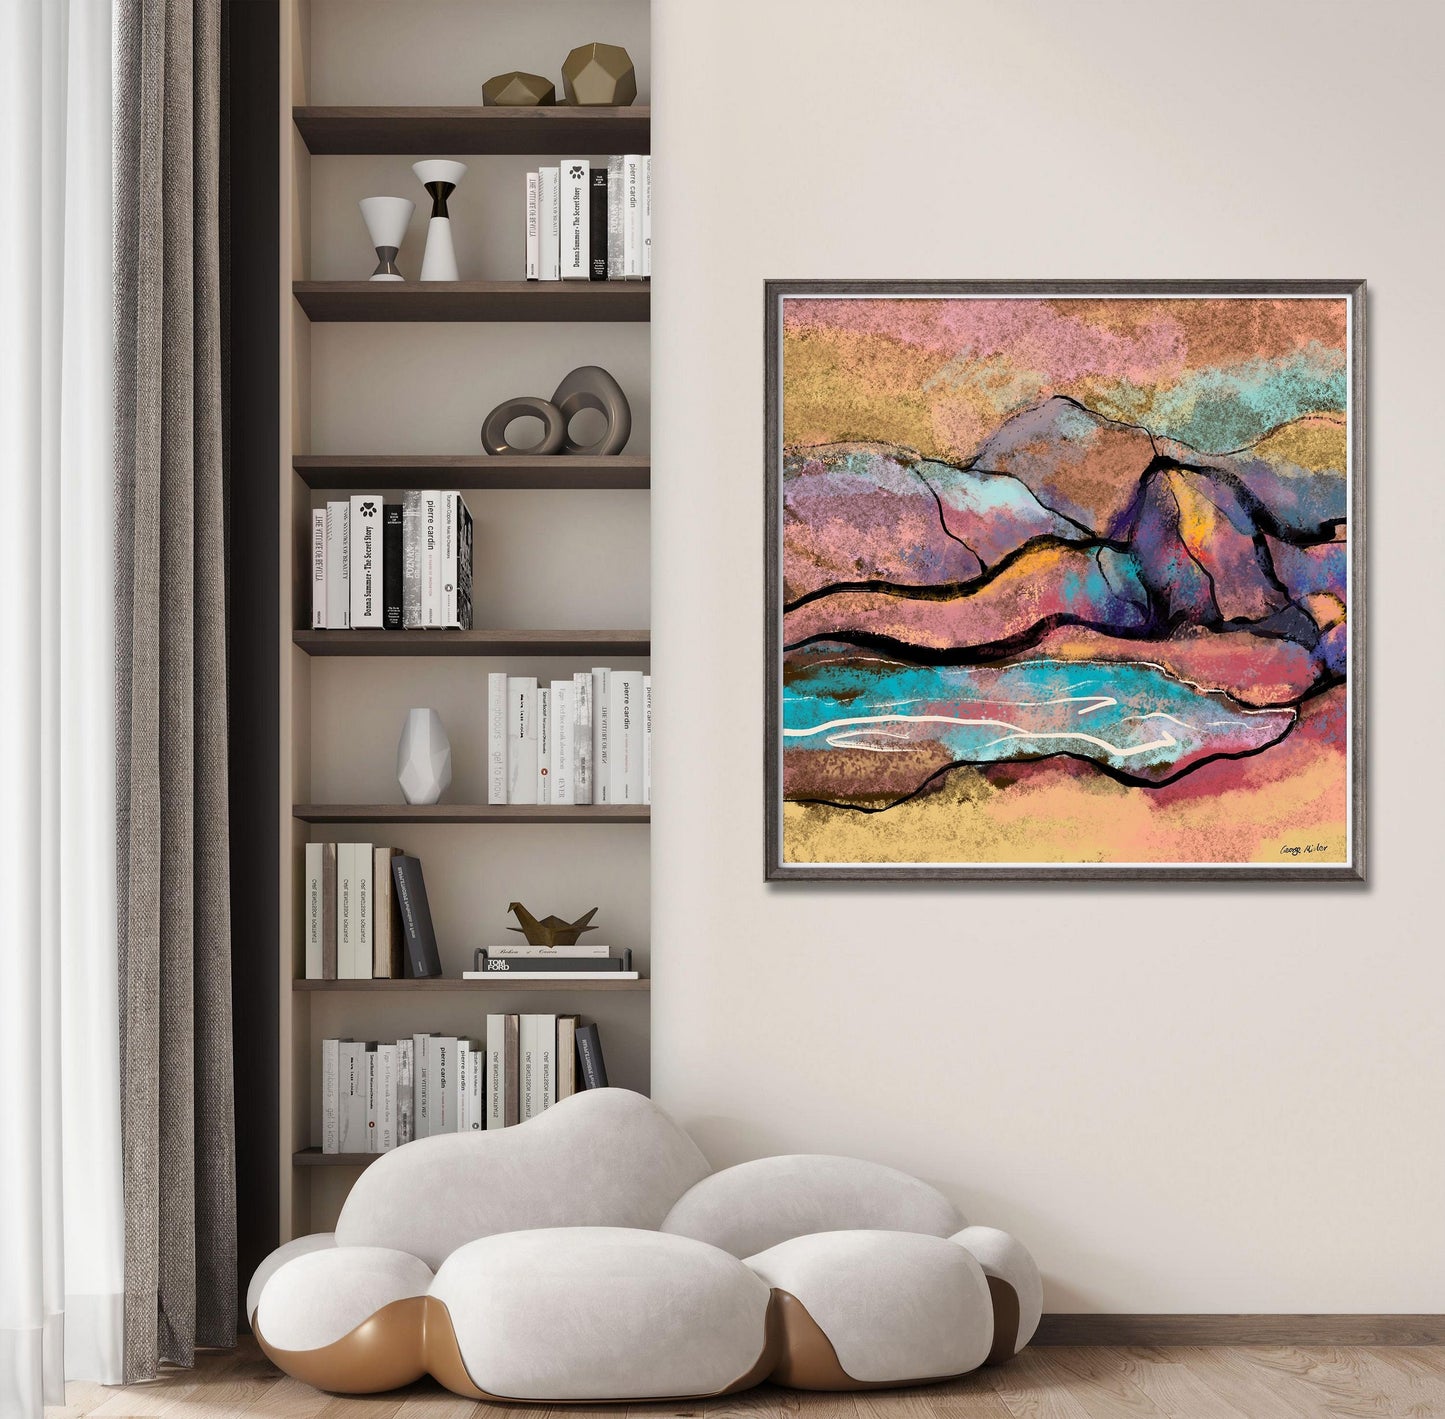 Prints For Wall Art, Abstract Landscape with Mountains, Abstract Art Prints, Art, Artwork And Prints For Walls, Modern Wall Art Abstract